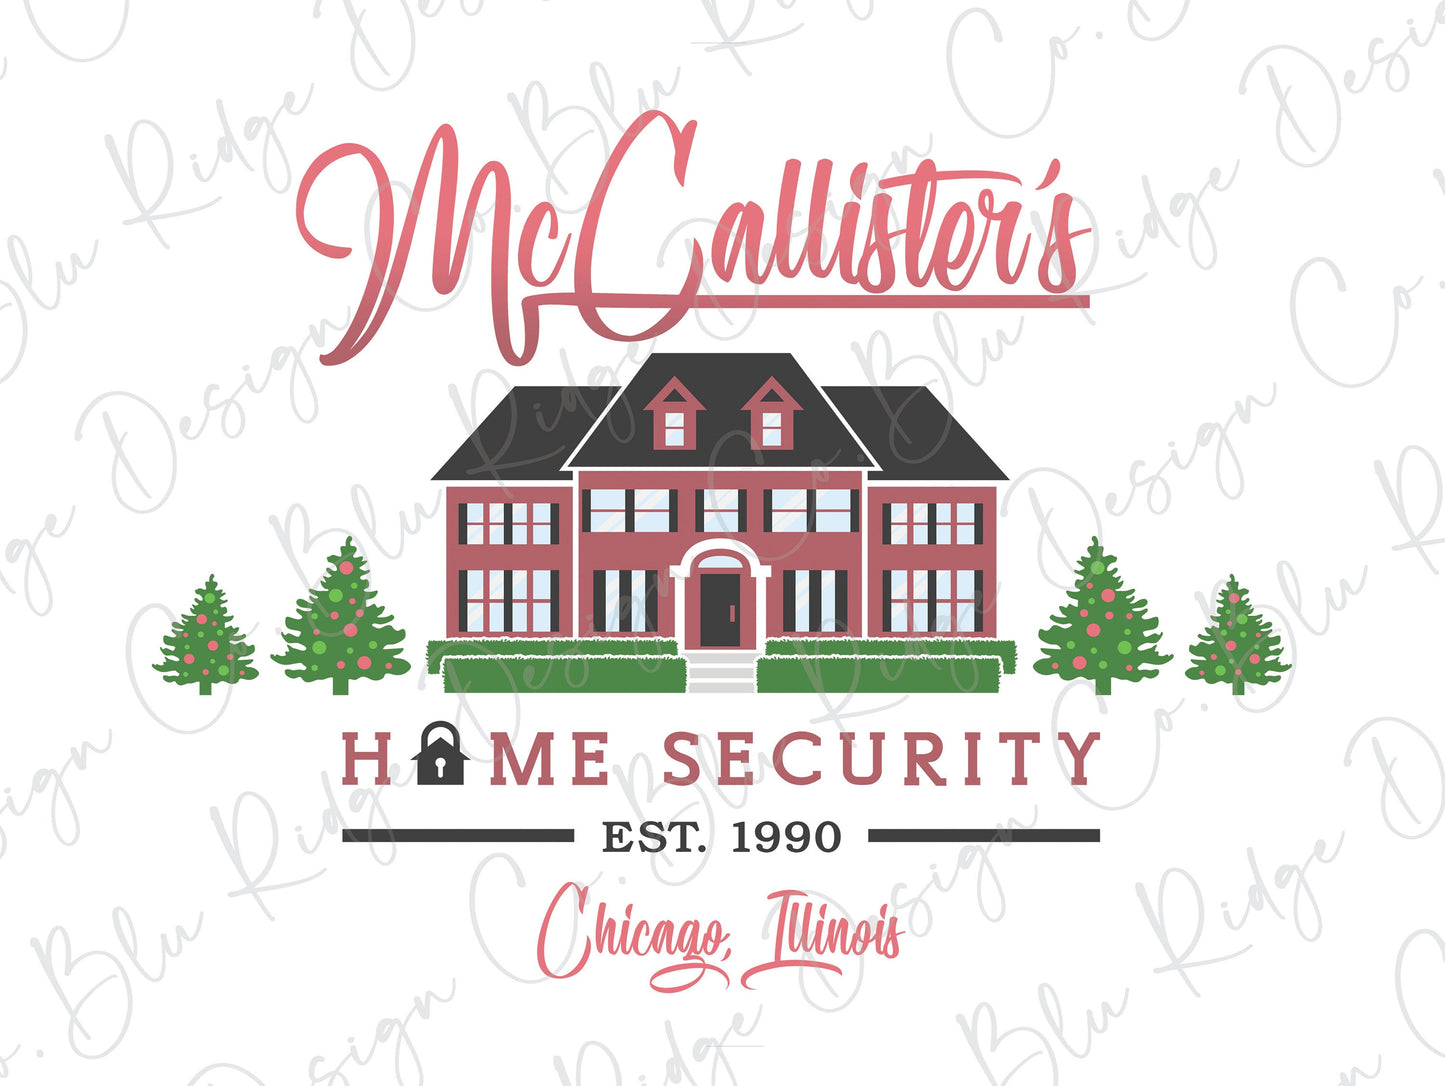 McCallister's Home Security Direct To Film (DTF) Transfer